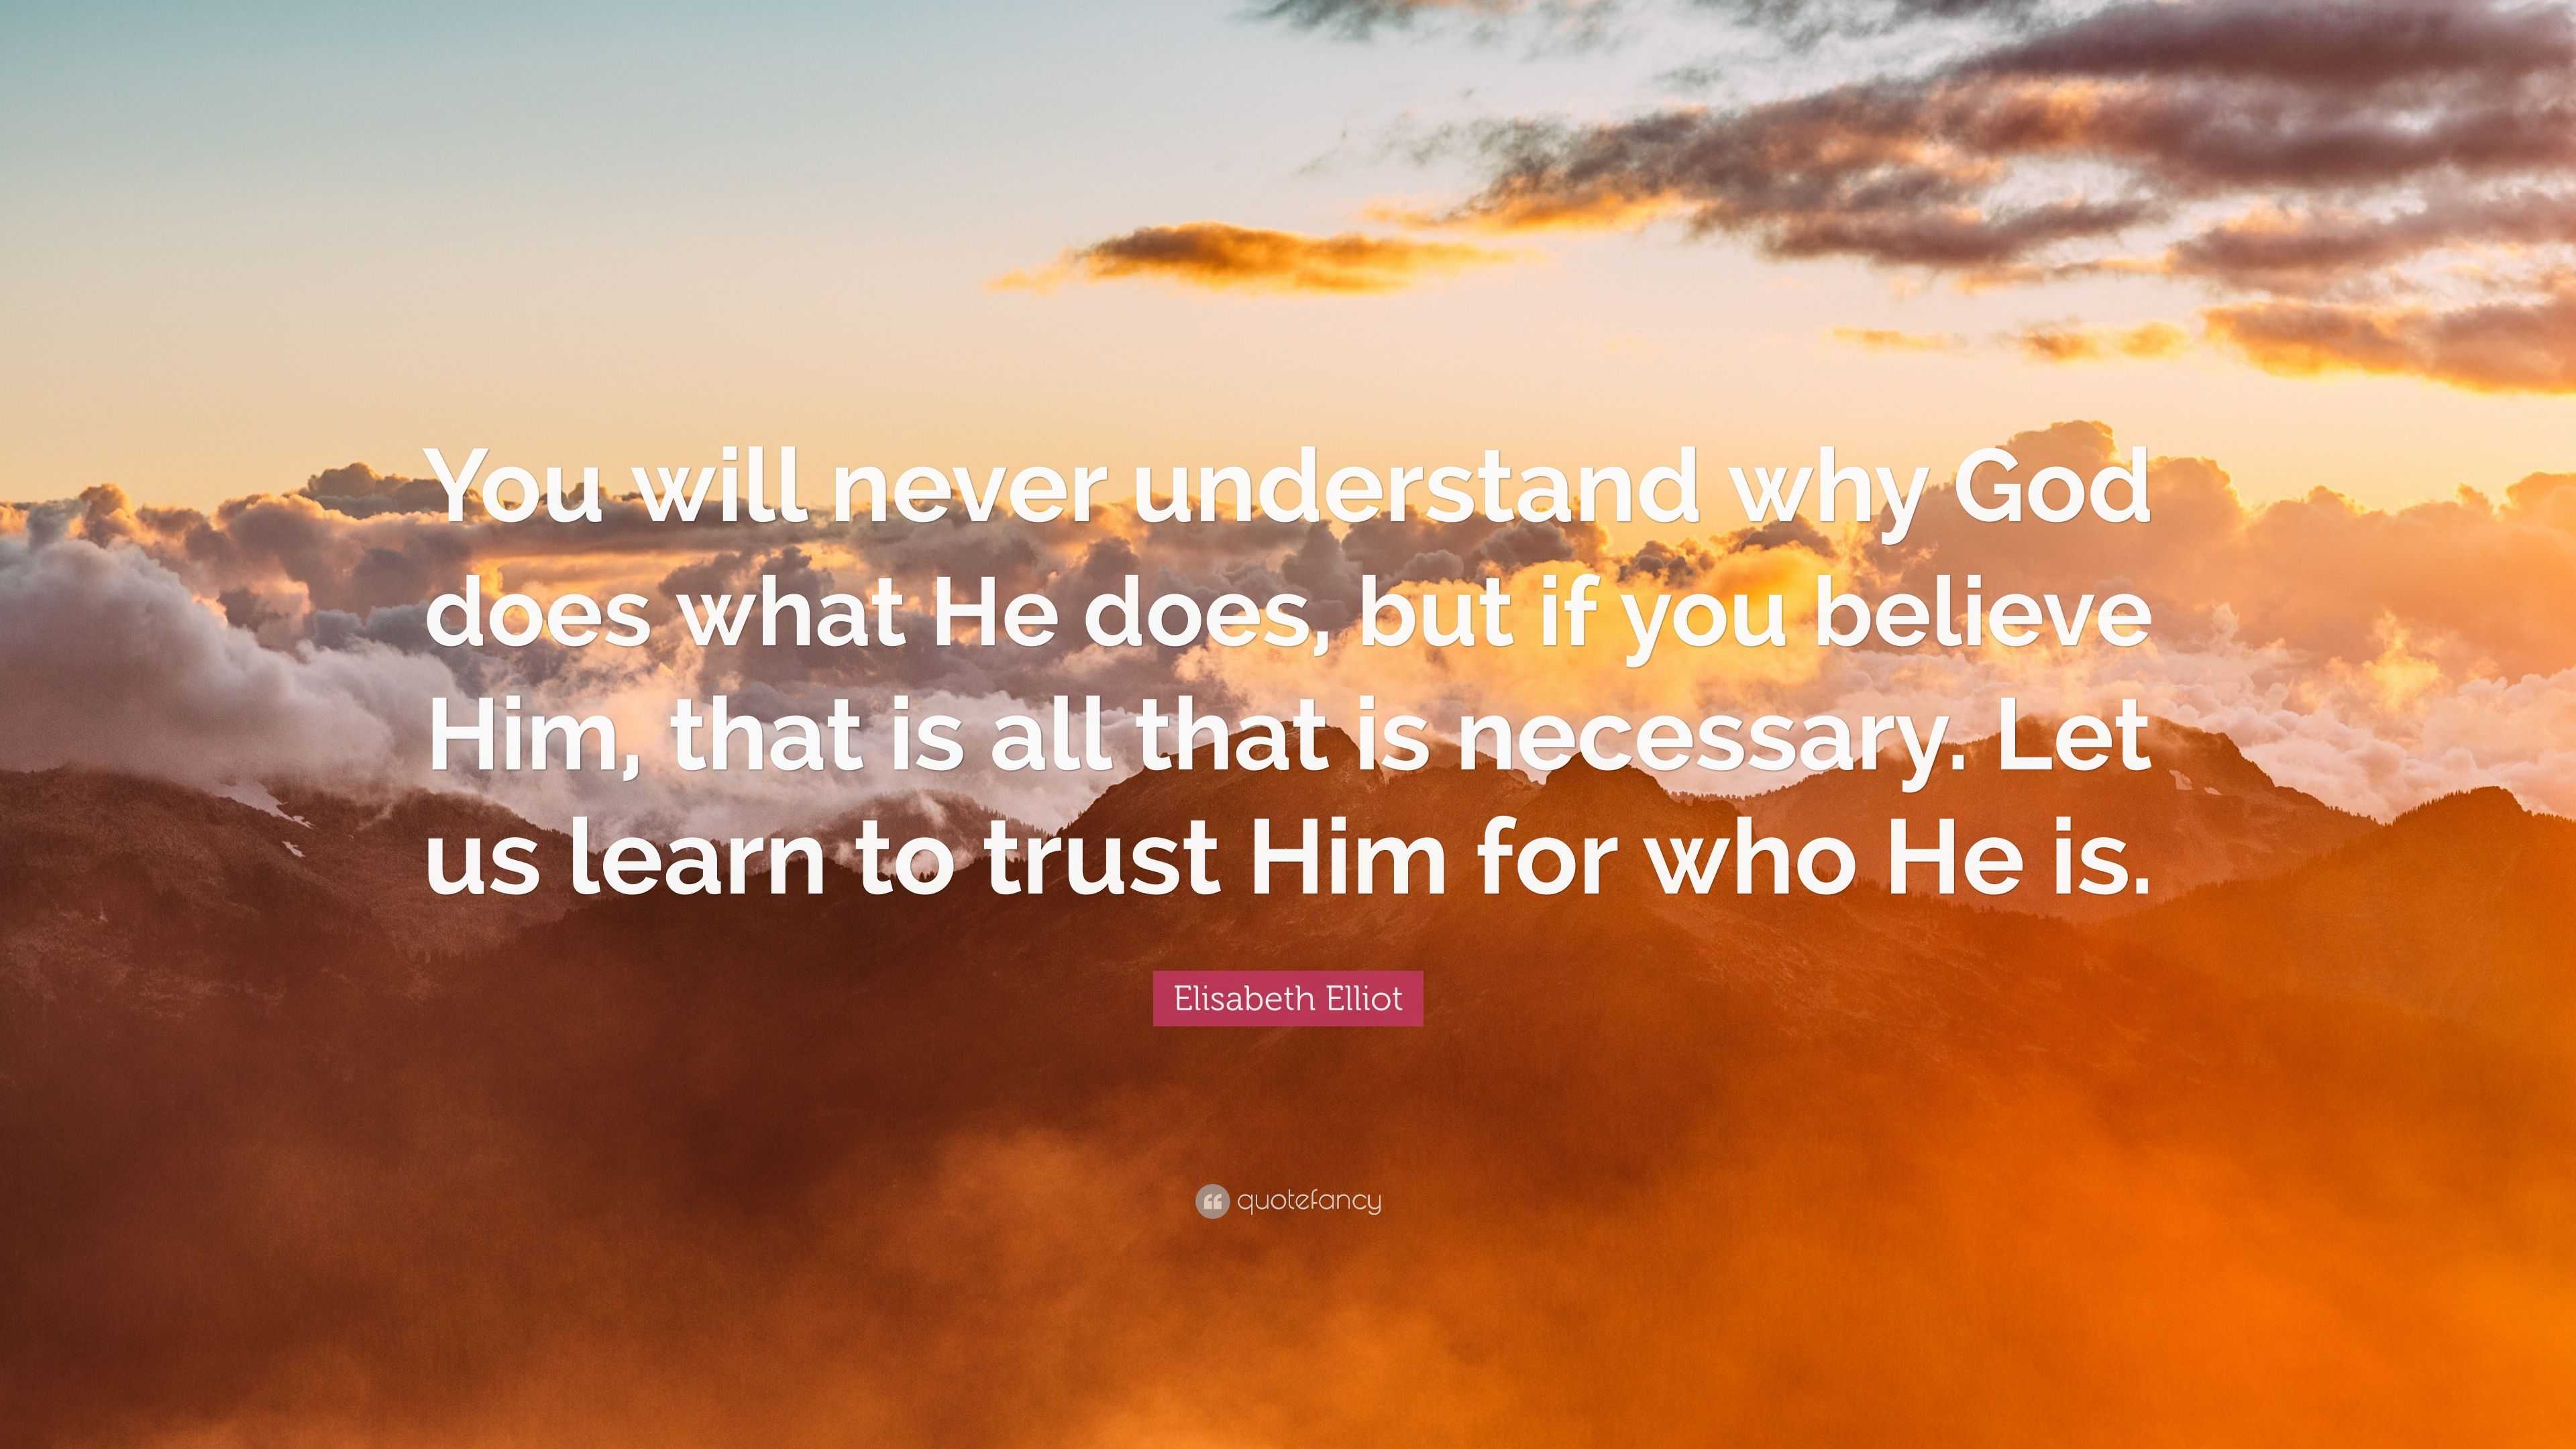 Elisabeth Elliot Quote: “You will never understand why God does what He ...